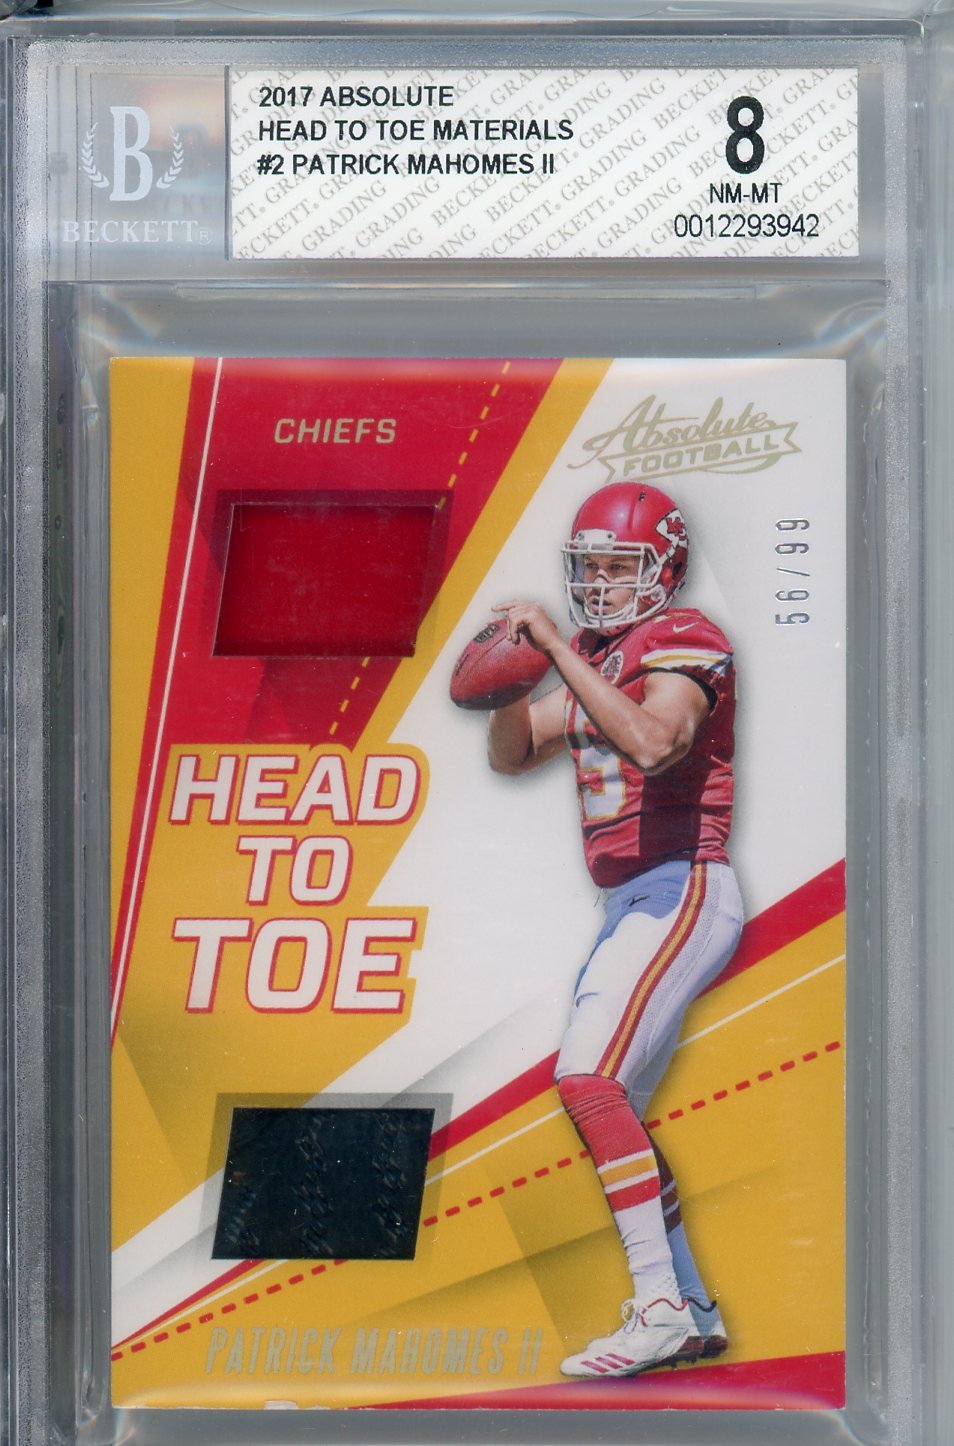 2017 Absolute Head to Toe Materials Patrick Mahomes Rookie Card BGS 8 /99